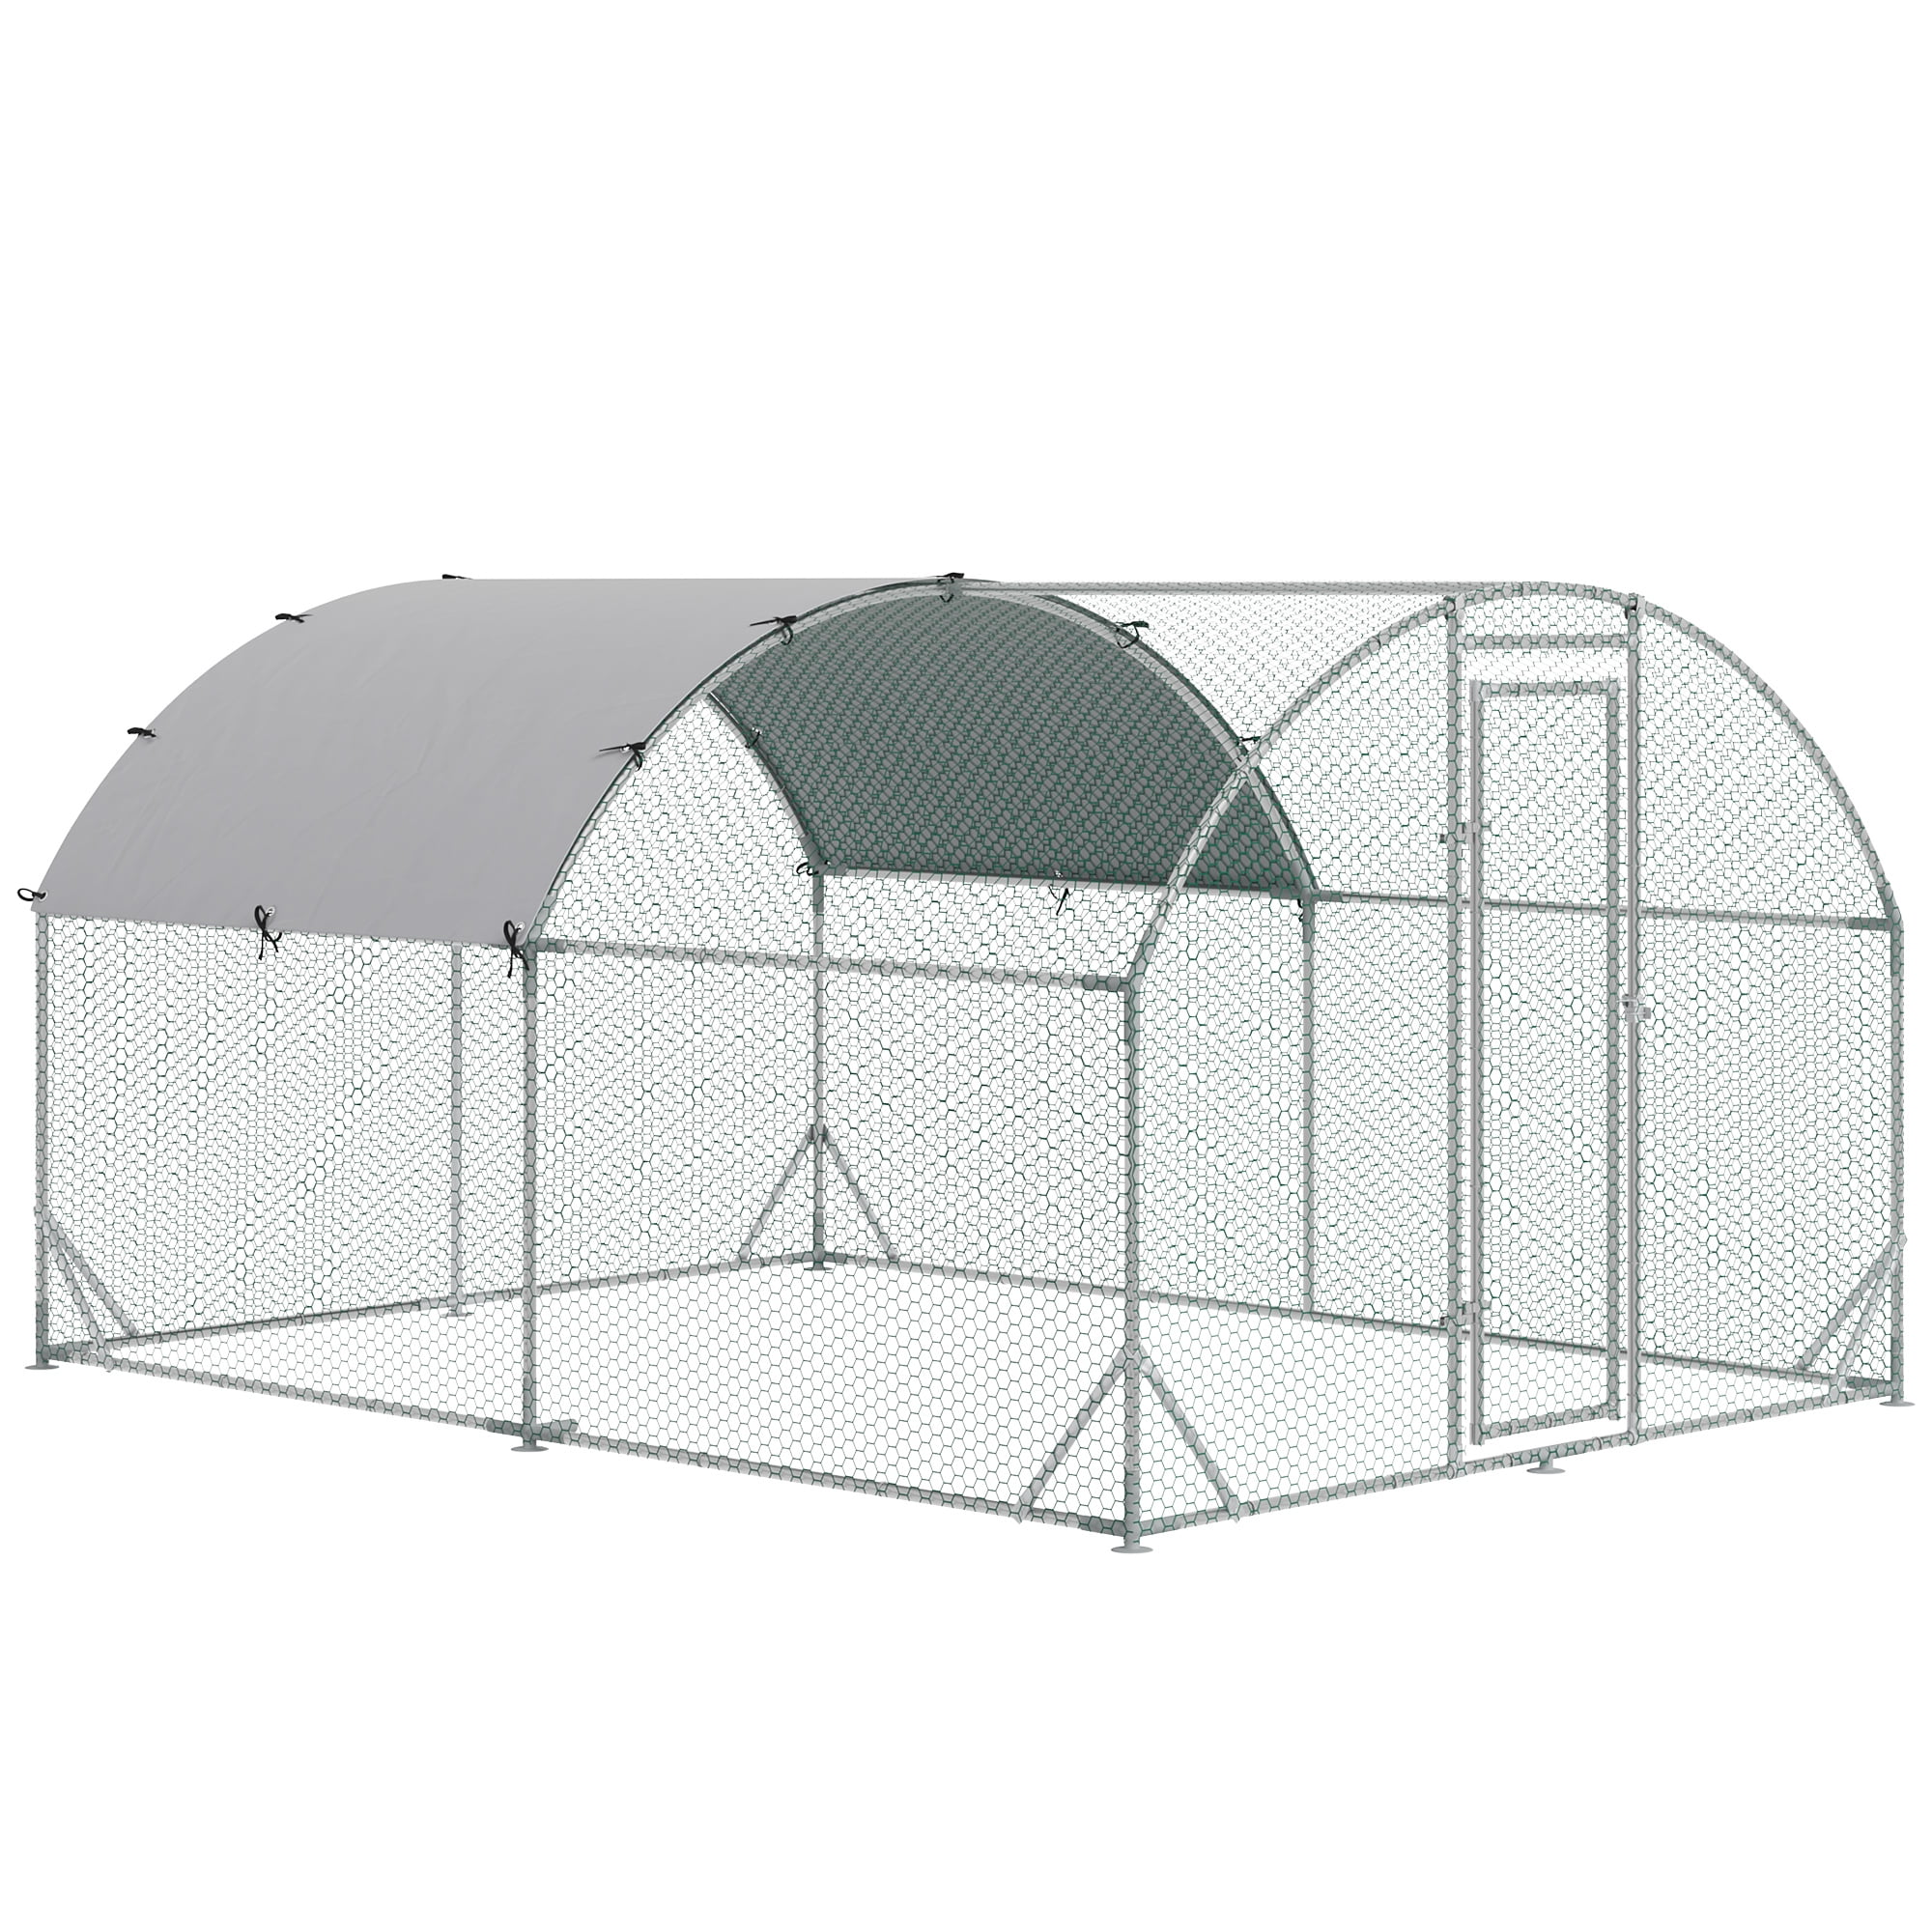 PawHut Galvanized Large Metal Chicken Coop Cage Walk-in Enclosure Poultry Hen Run House Playpen Rabbit Hutch with Cover for Outdoor Backyard Silver 